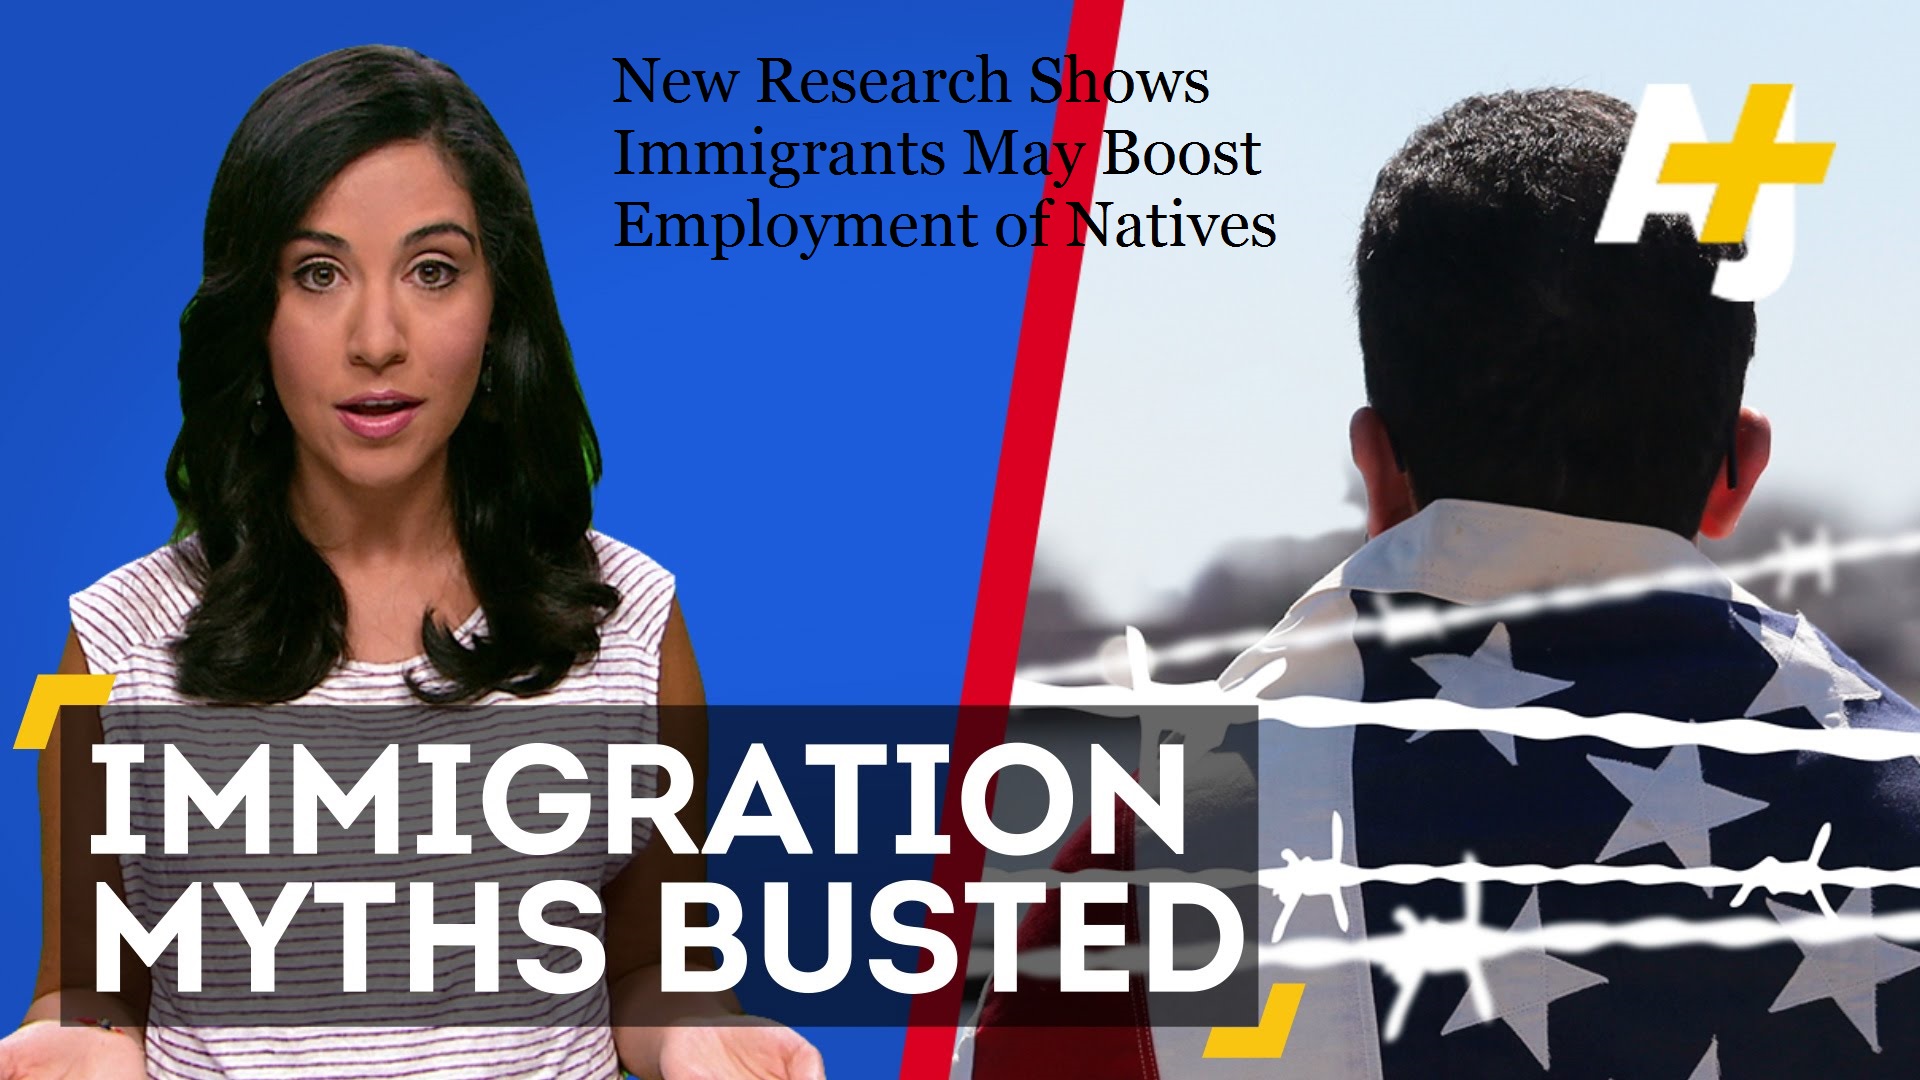 New Research Shows Immigrants May Boost Employment of Natives